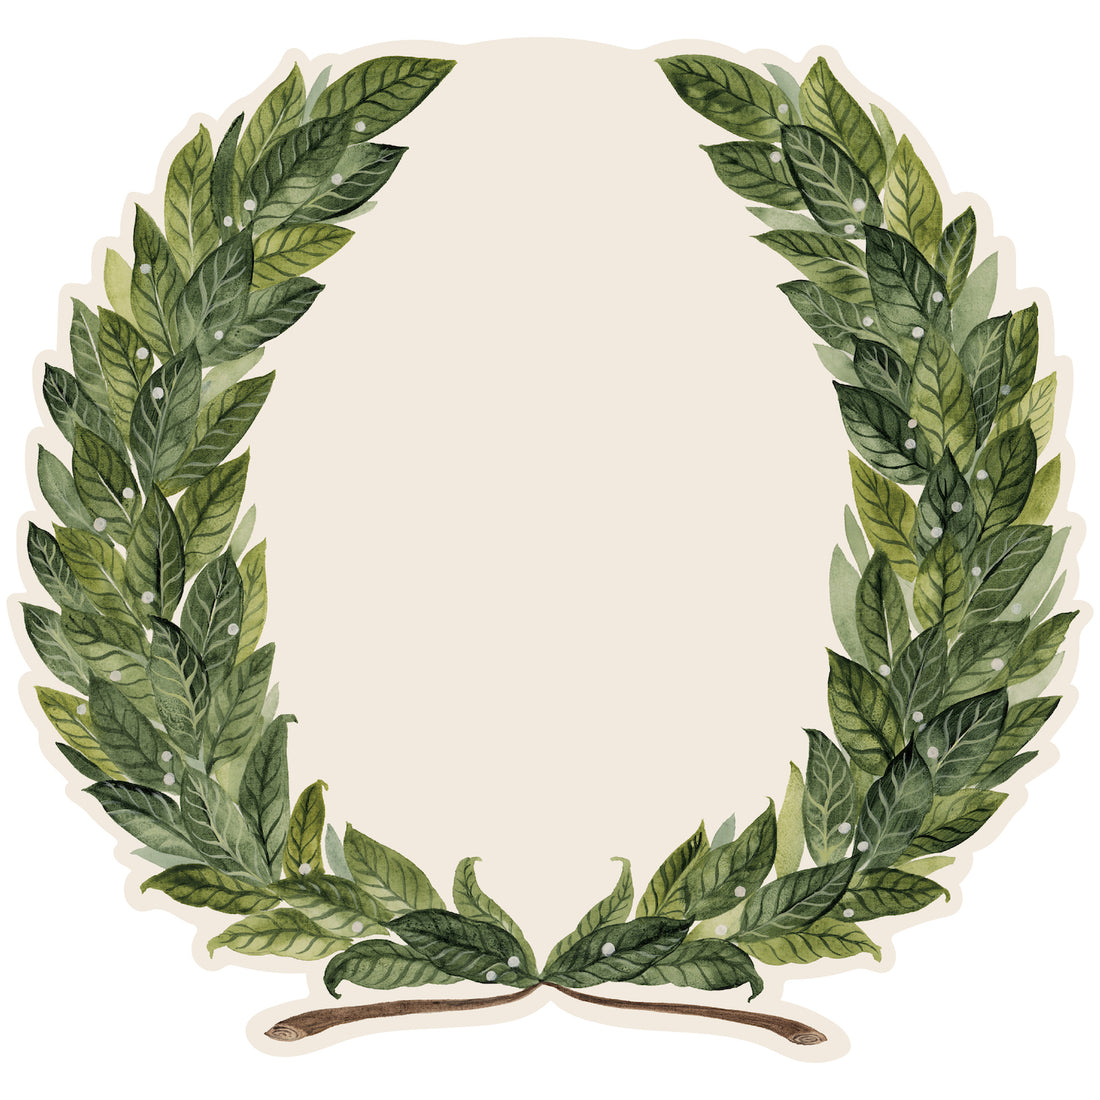 A round die-cut illustration featuring two branches of rich green laurel leaves and small white berries, stems crossed at the bottom, open to the white background in the top and center.